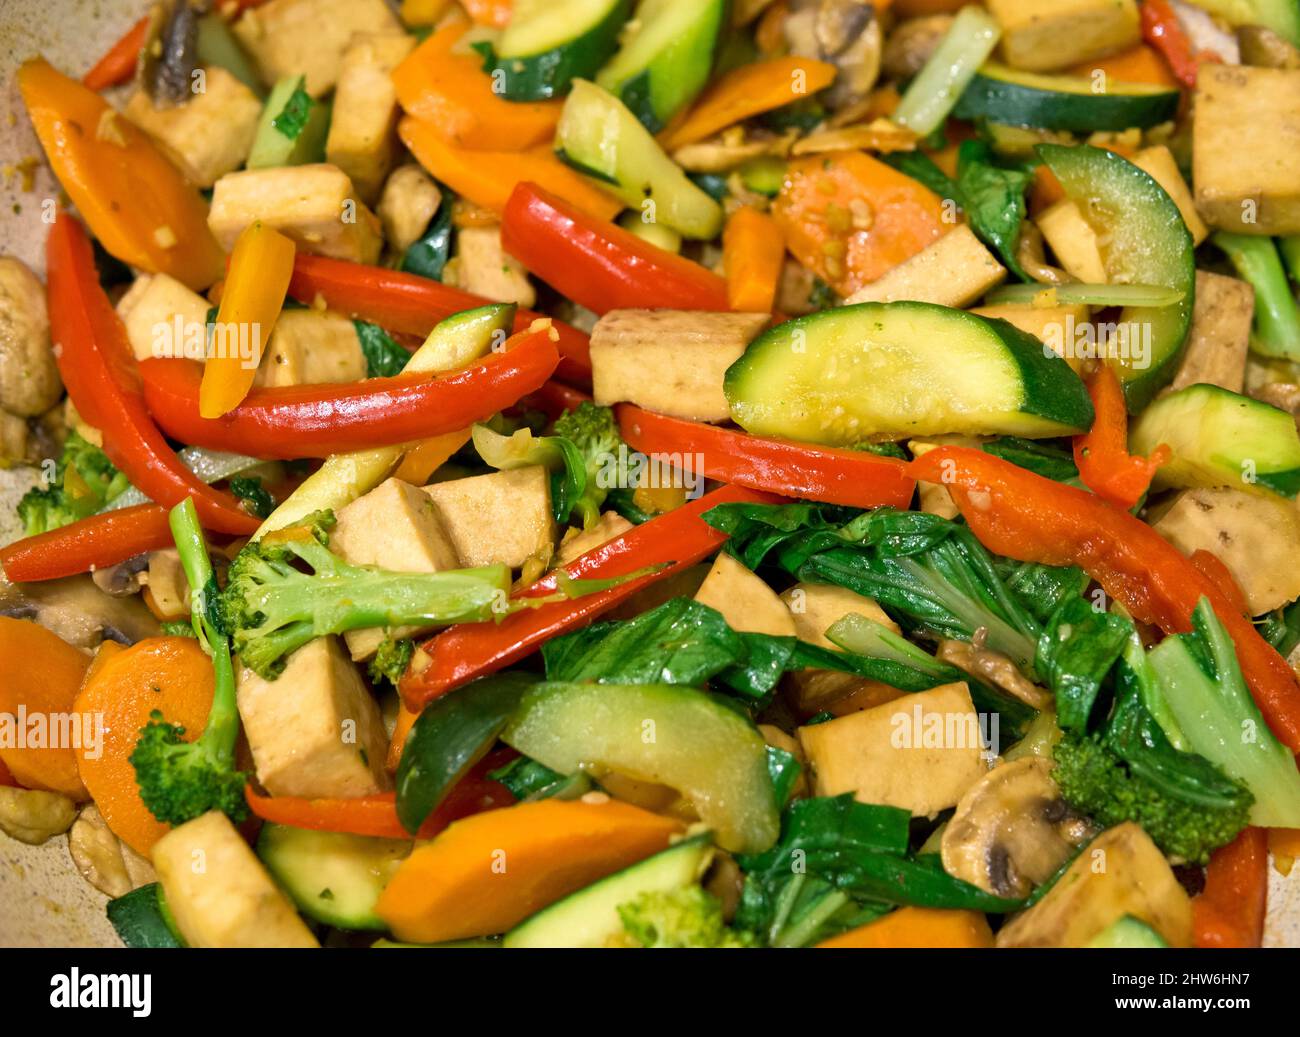 Tofu stir fry with red bell peppers, zucchini, carrots, and bok choy.  Tofu and vegetables in a pan. Stock Photo